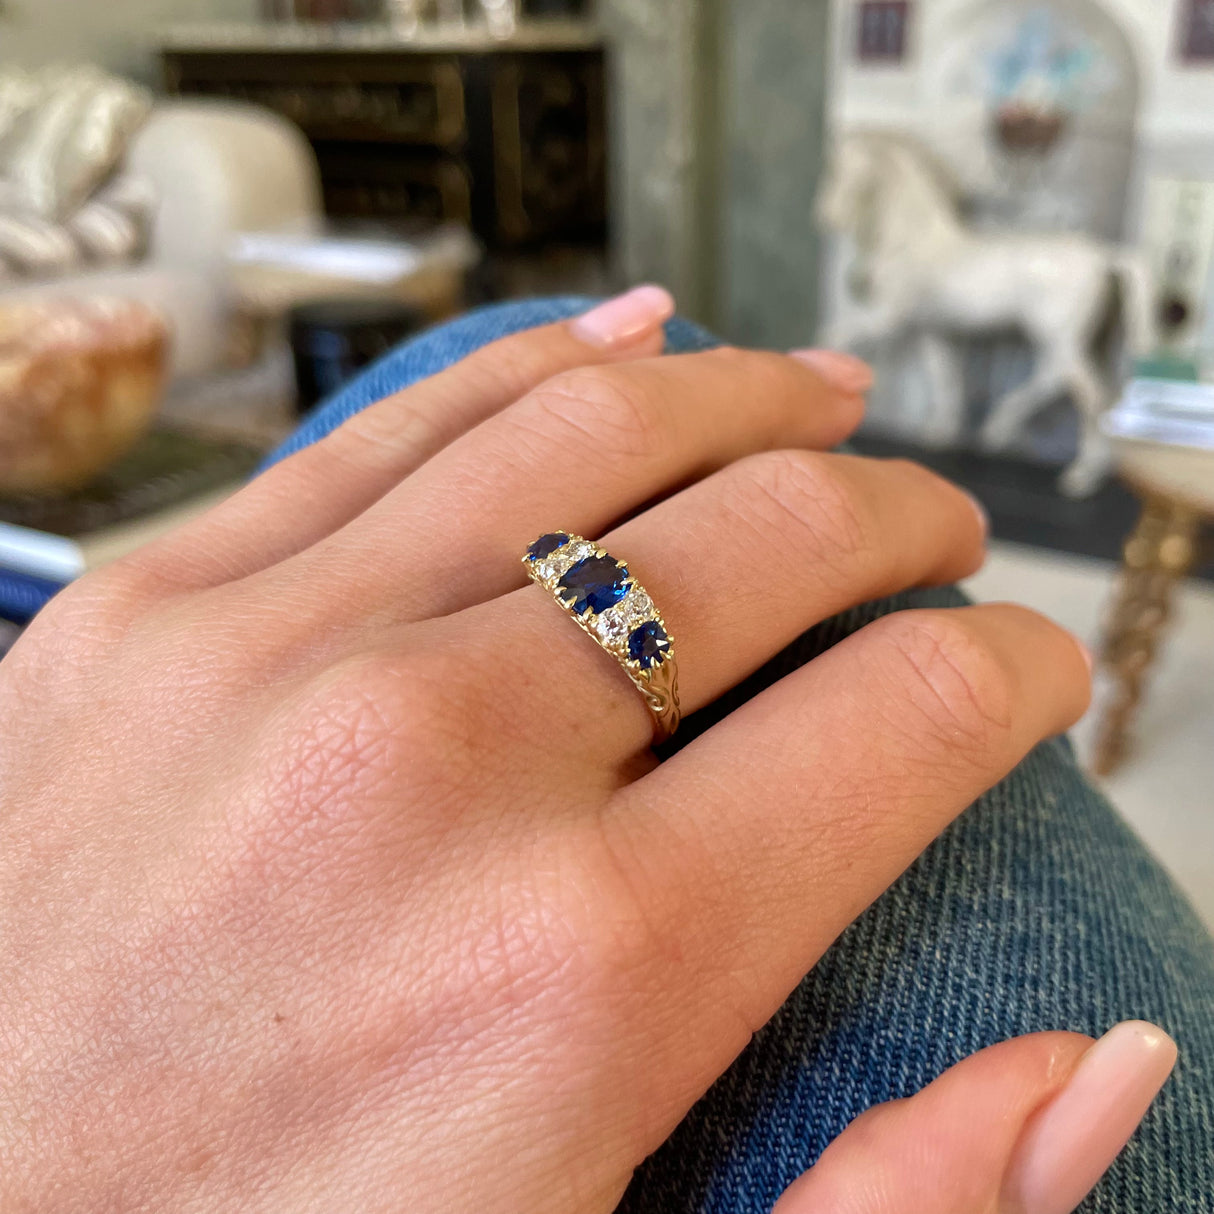 sapphire and diamond engagement ring, worn on hand.